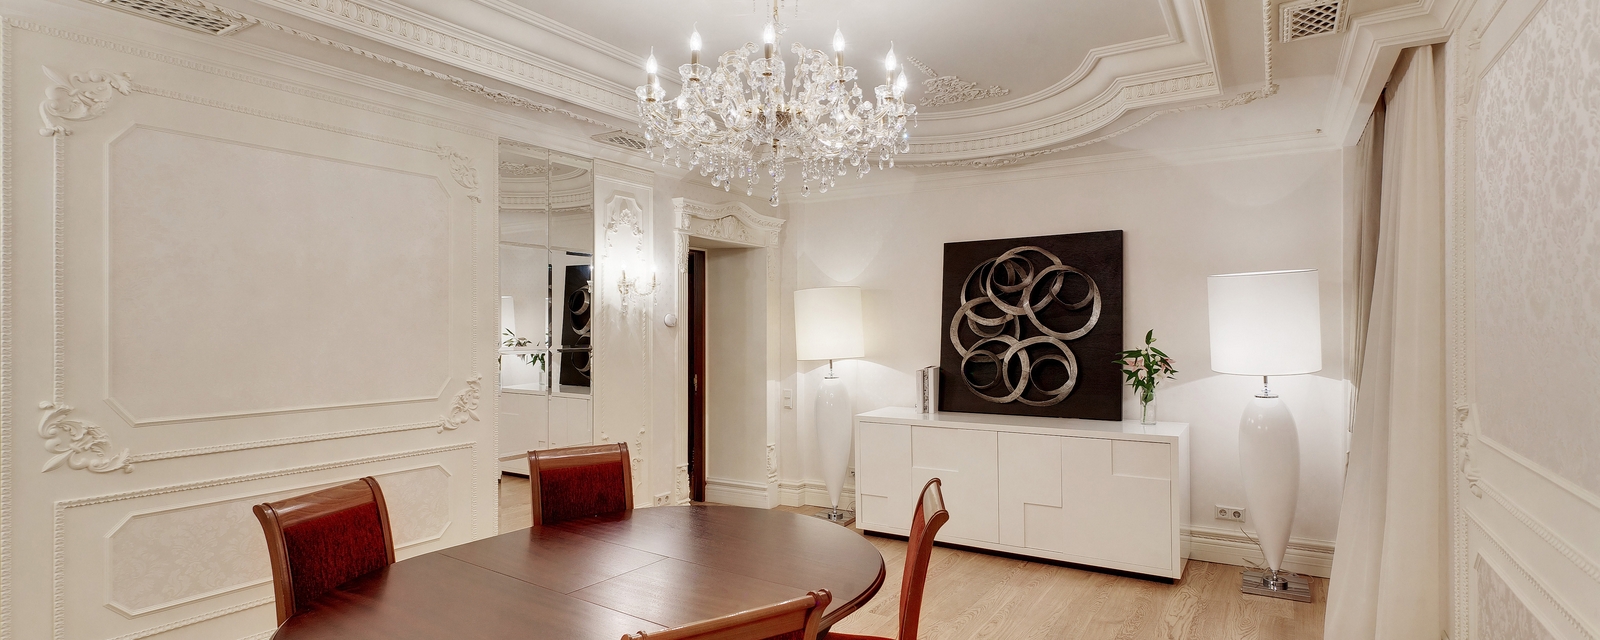 Europlast polyurethane products in the dining room